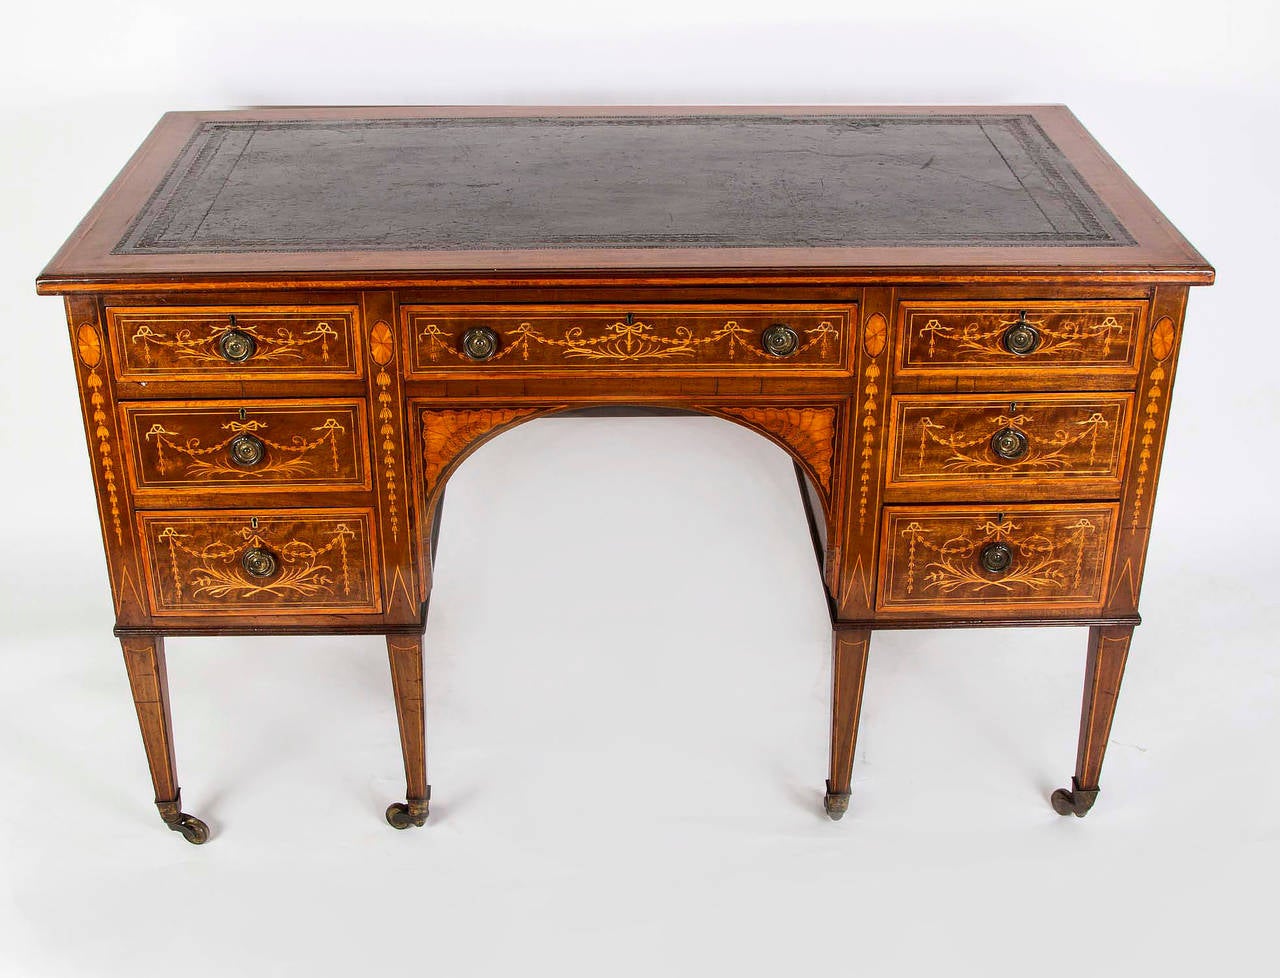 This is a stunning antique Edwardian pedestal desk, circa 1890 in date. 
The desk bears the impressed stamp of the renowned cabinet maker James Shoolbred & Co. 

It has its original leather writing surface with hand tooled gold leaf